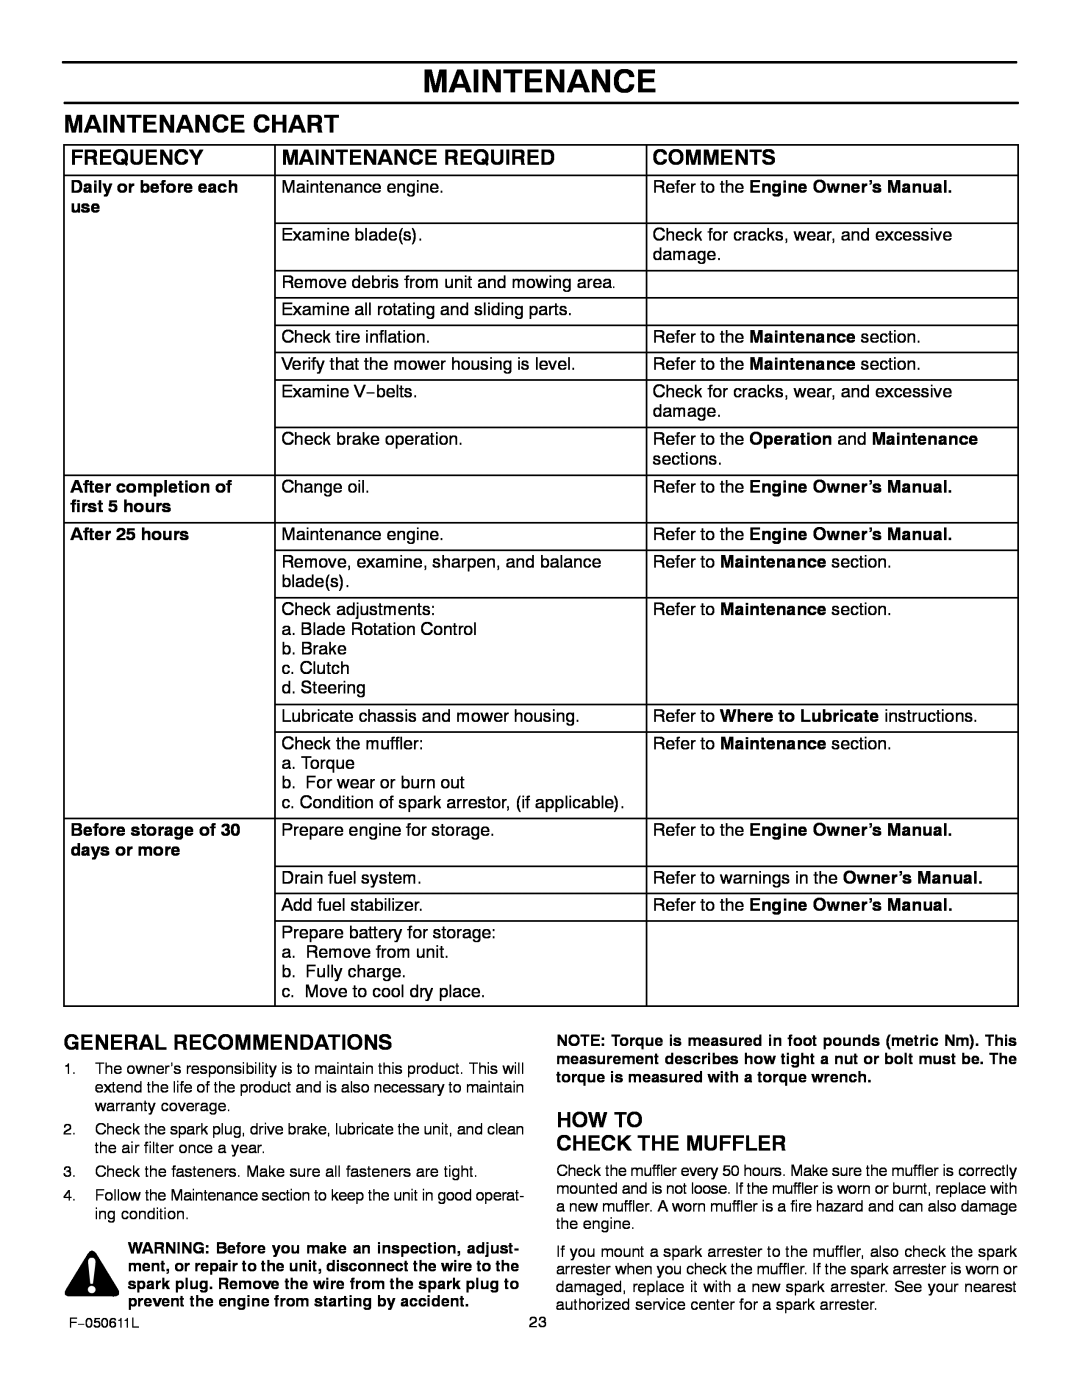 Murray 309007x8B manual Maintenance Chart, Frequency, Maintenance Required, Comments, General Recommendations 